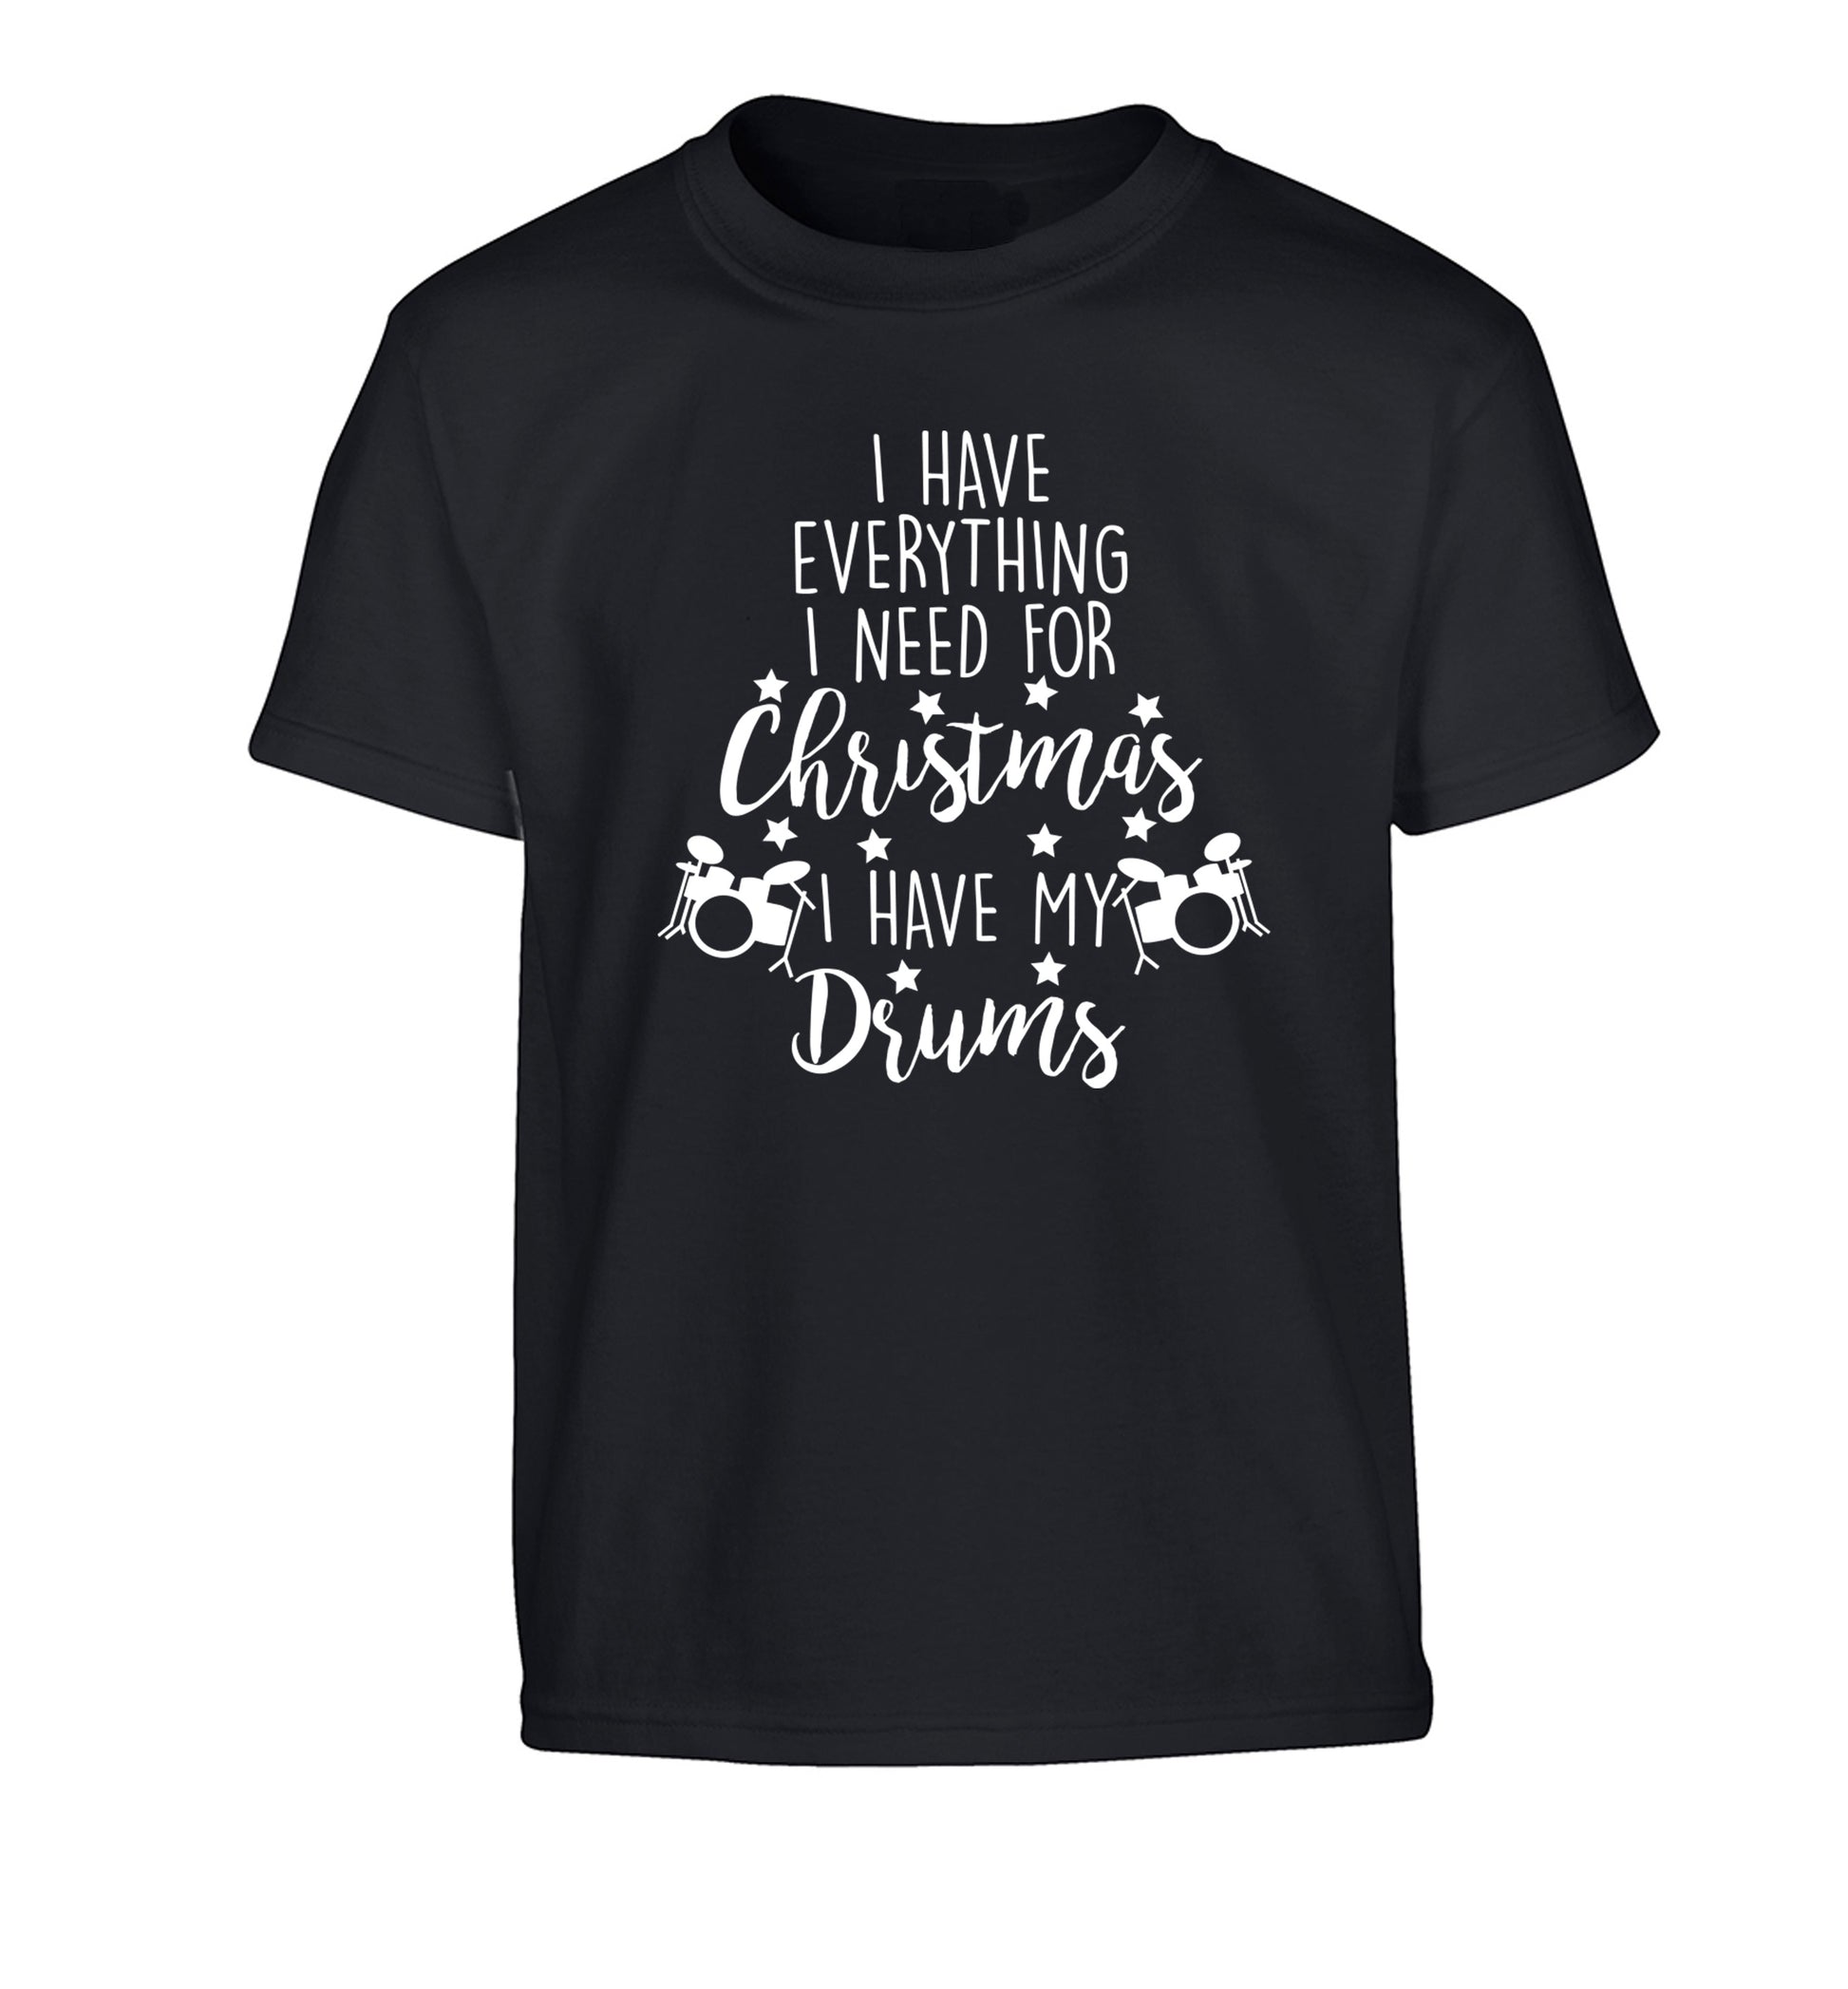 I have everything I need for Christmas I have my drums! Children's black Tshirt 12-14 Years